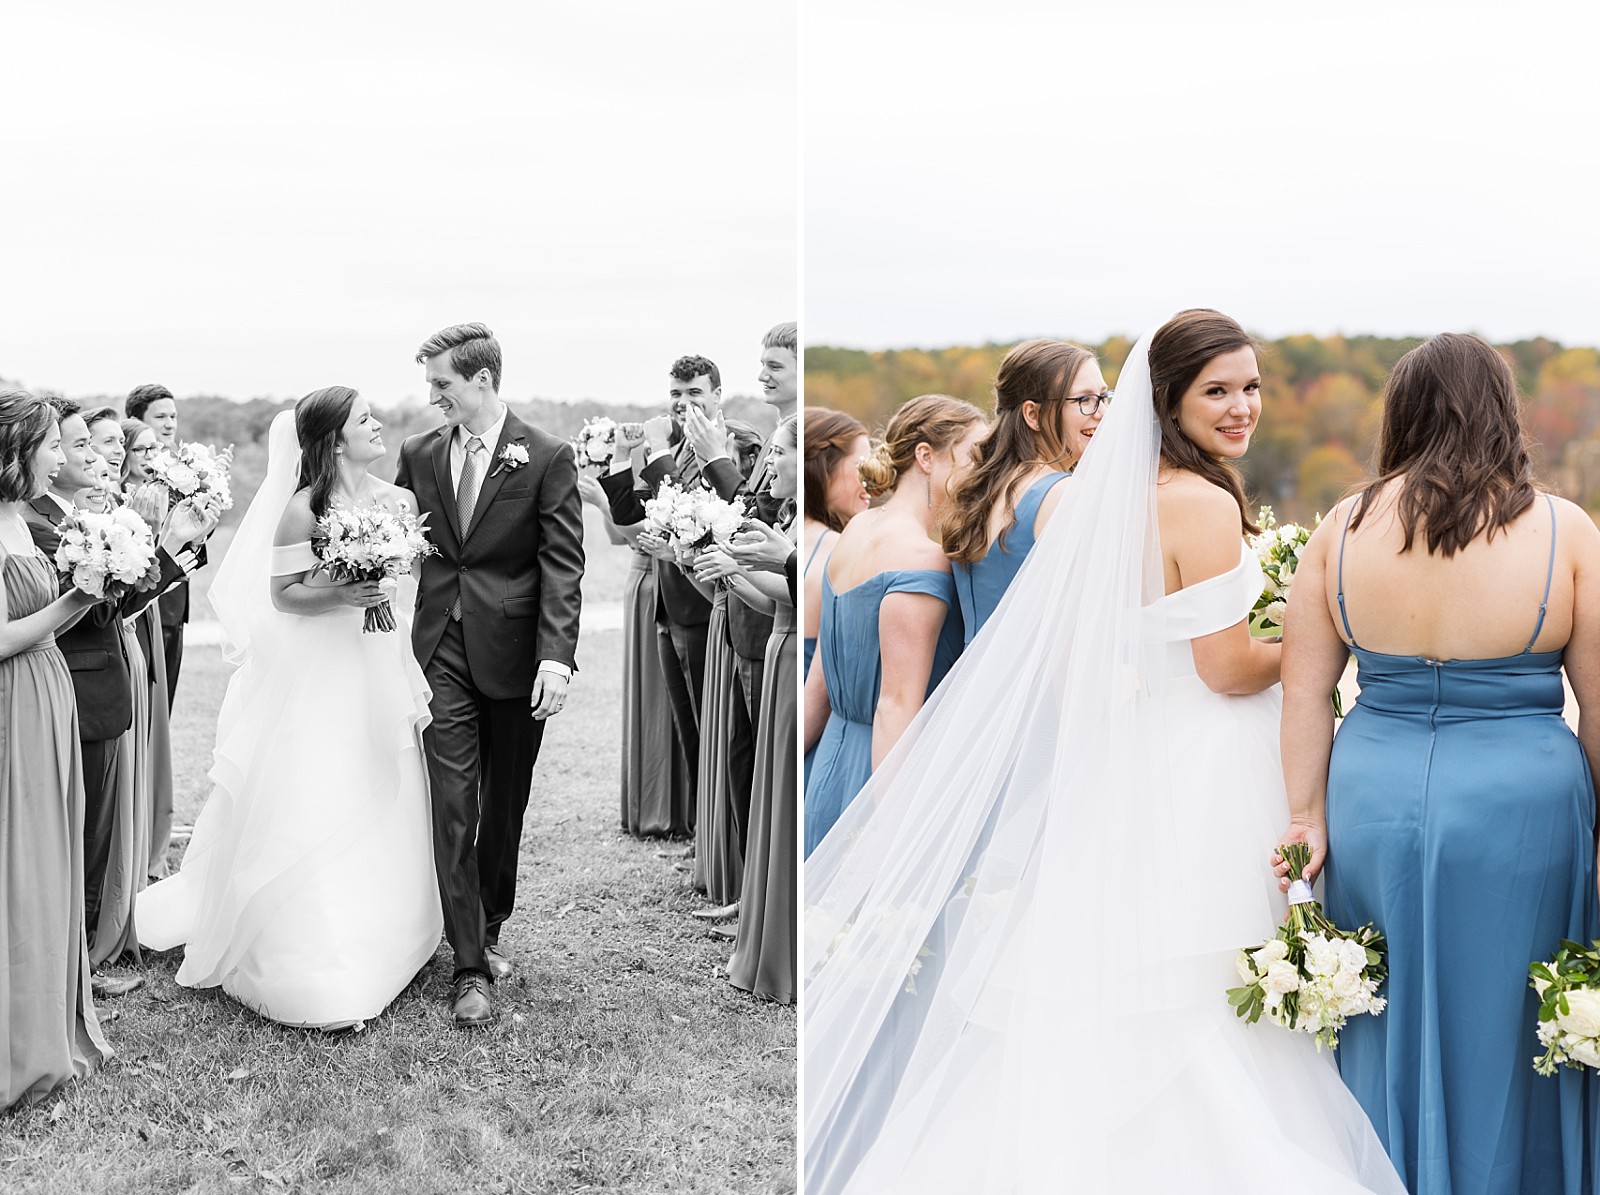 Bride and groom walking through their bridal party and bride looking over her shoulder   | Fall Wedding at The Meadows in Raleigh | Raleigh NC Wedding Photographer